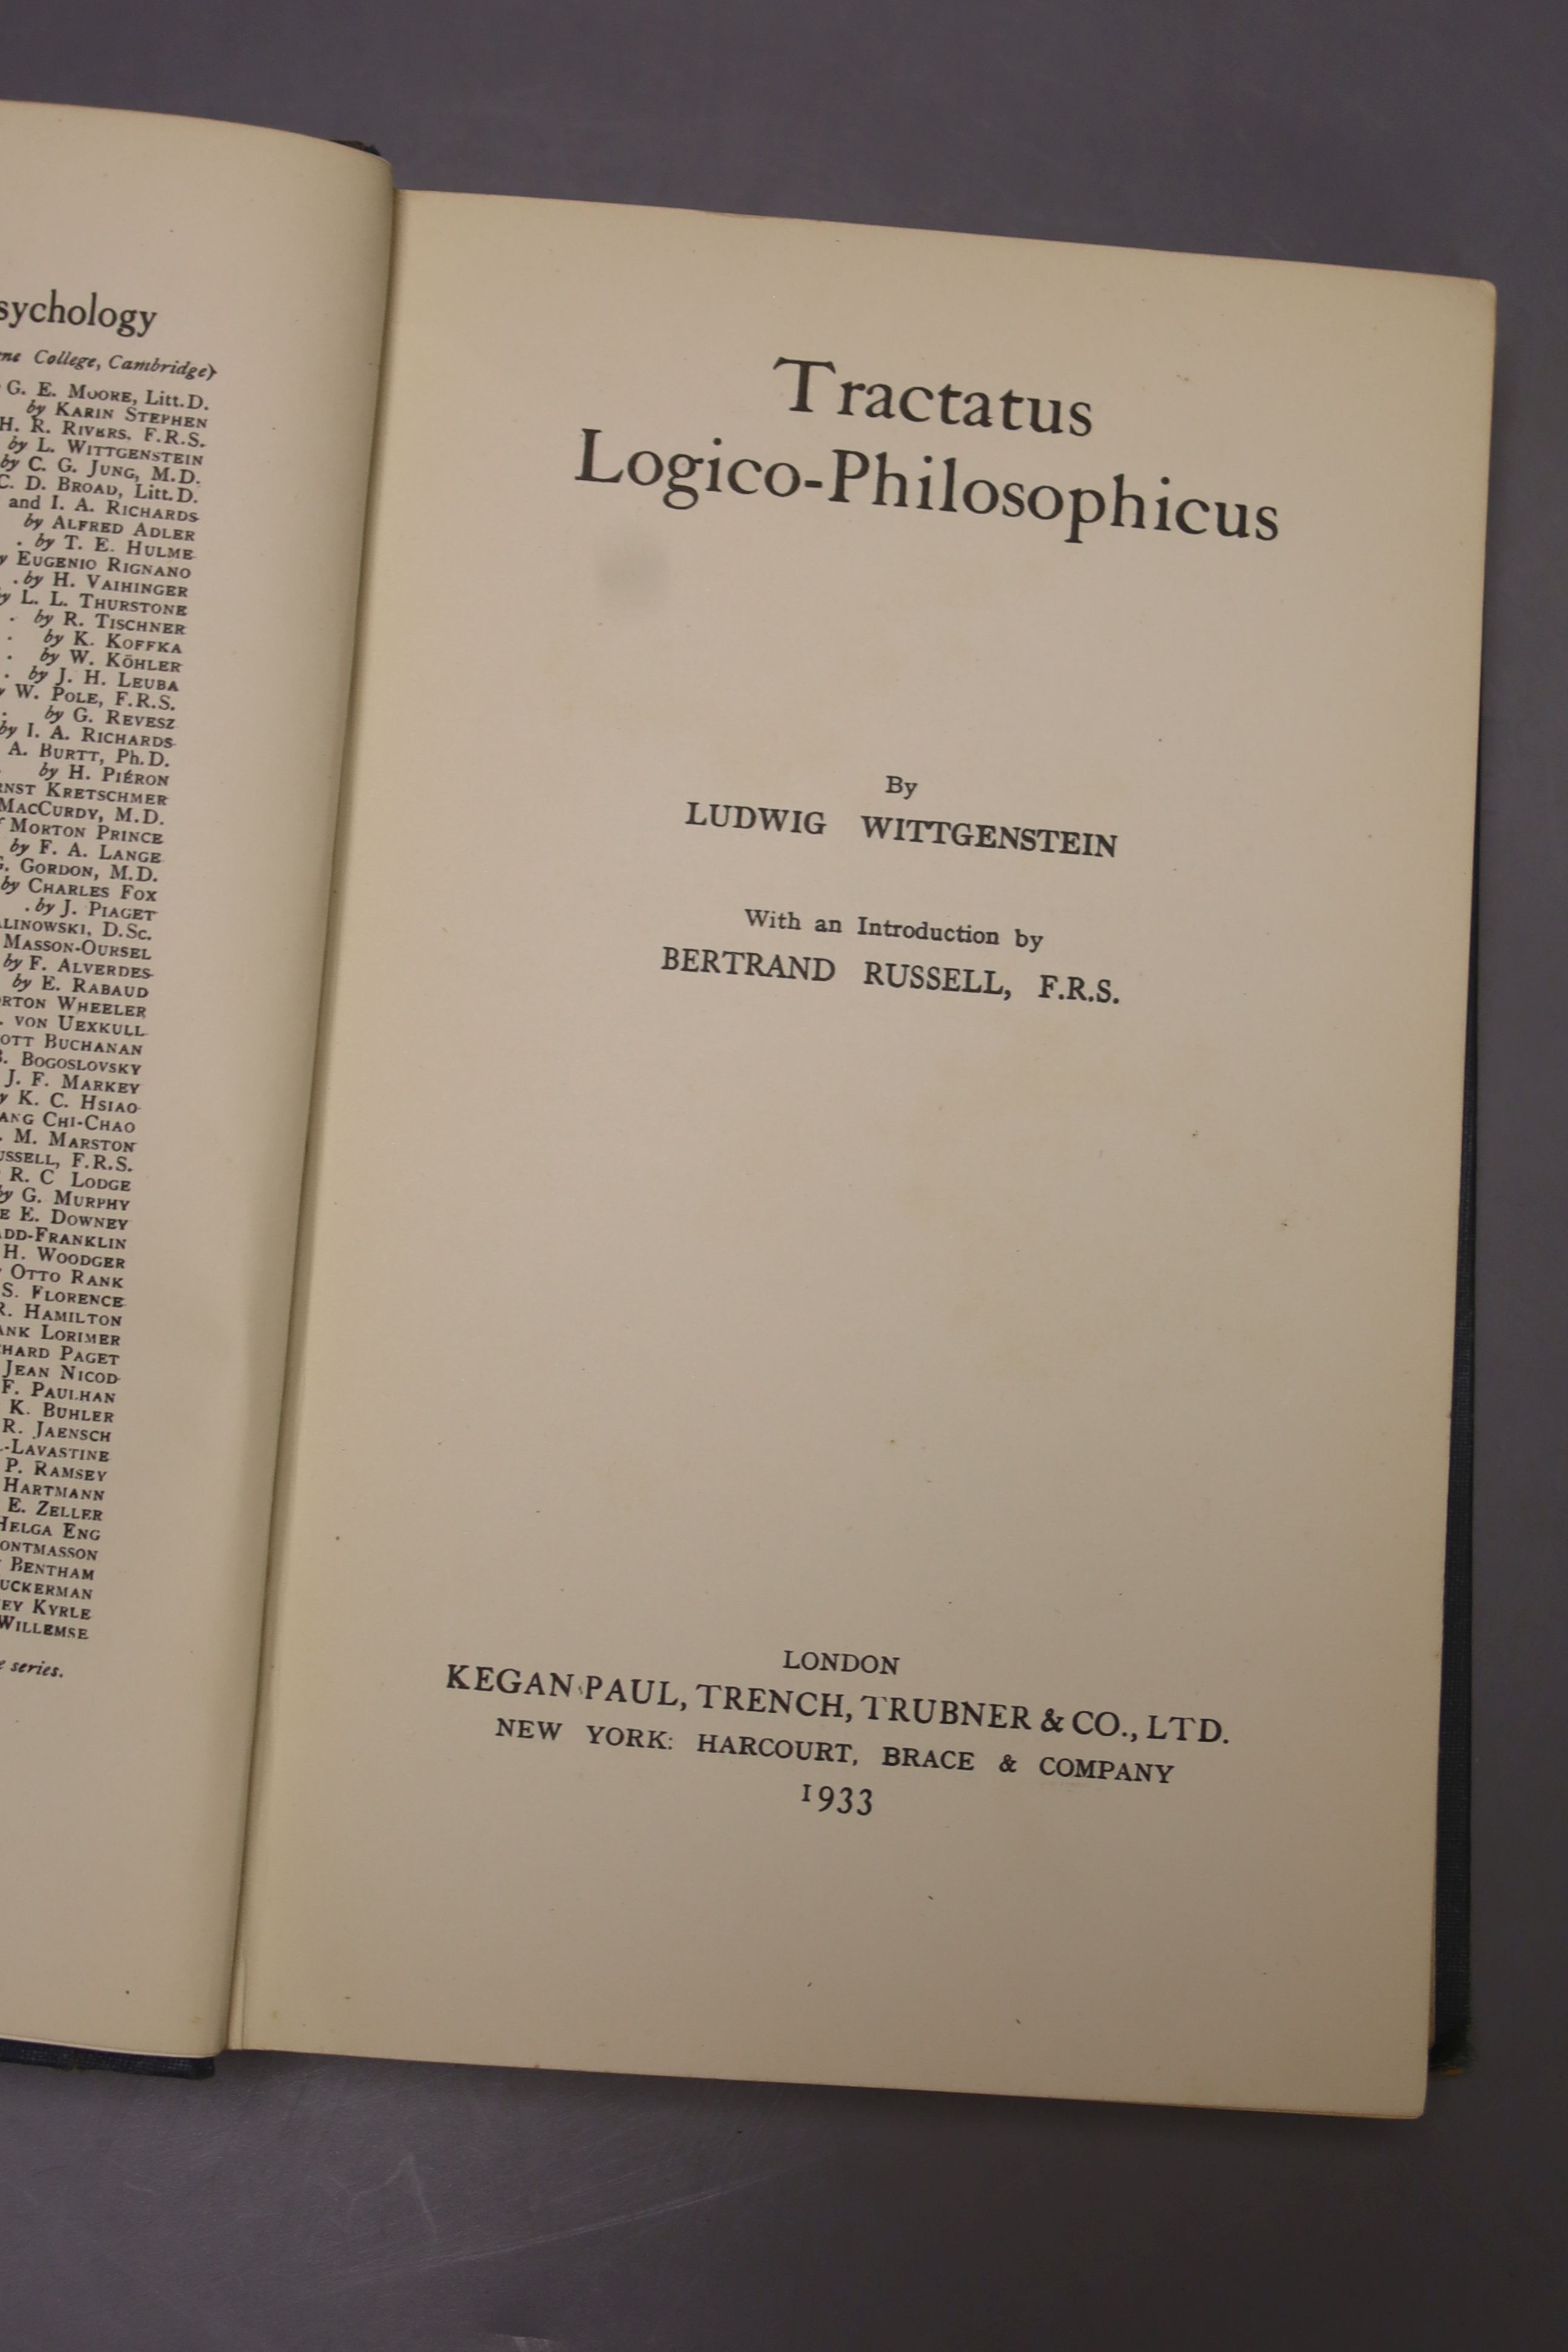 Wittgenstein, Ludwig – Tractatus Logico-Philosophicus, with an introduction by Bertrand Russell. gilt-lettered cloth, reprinted with a few corrections, 1933